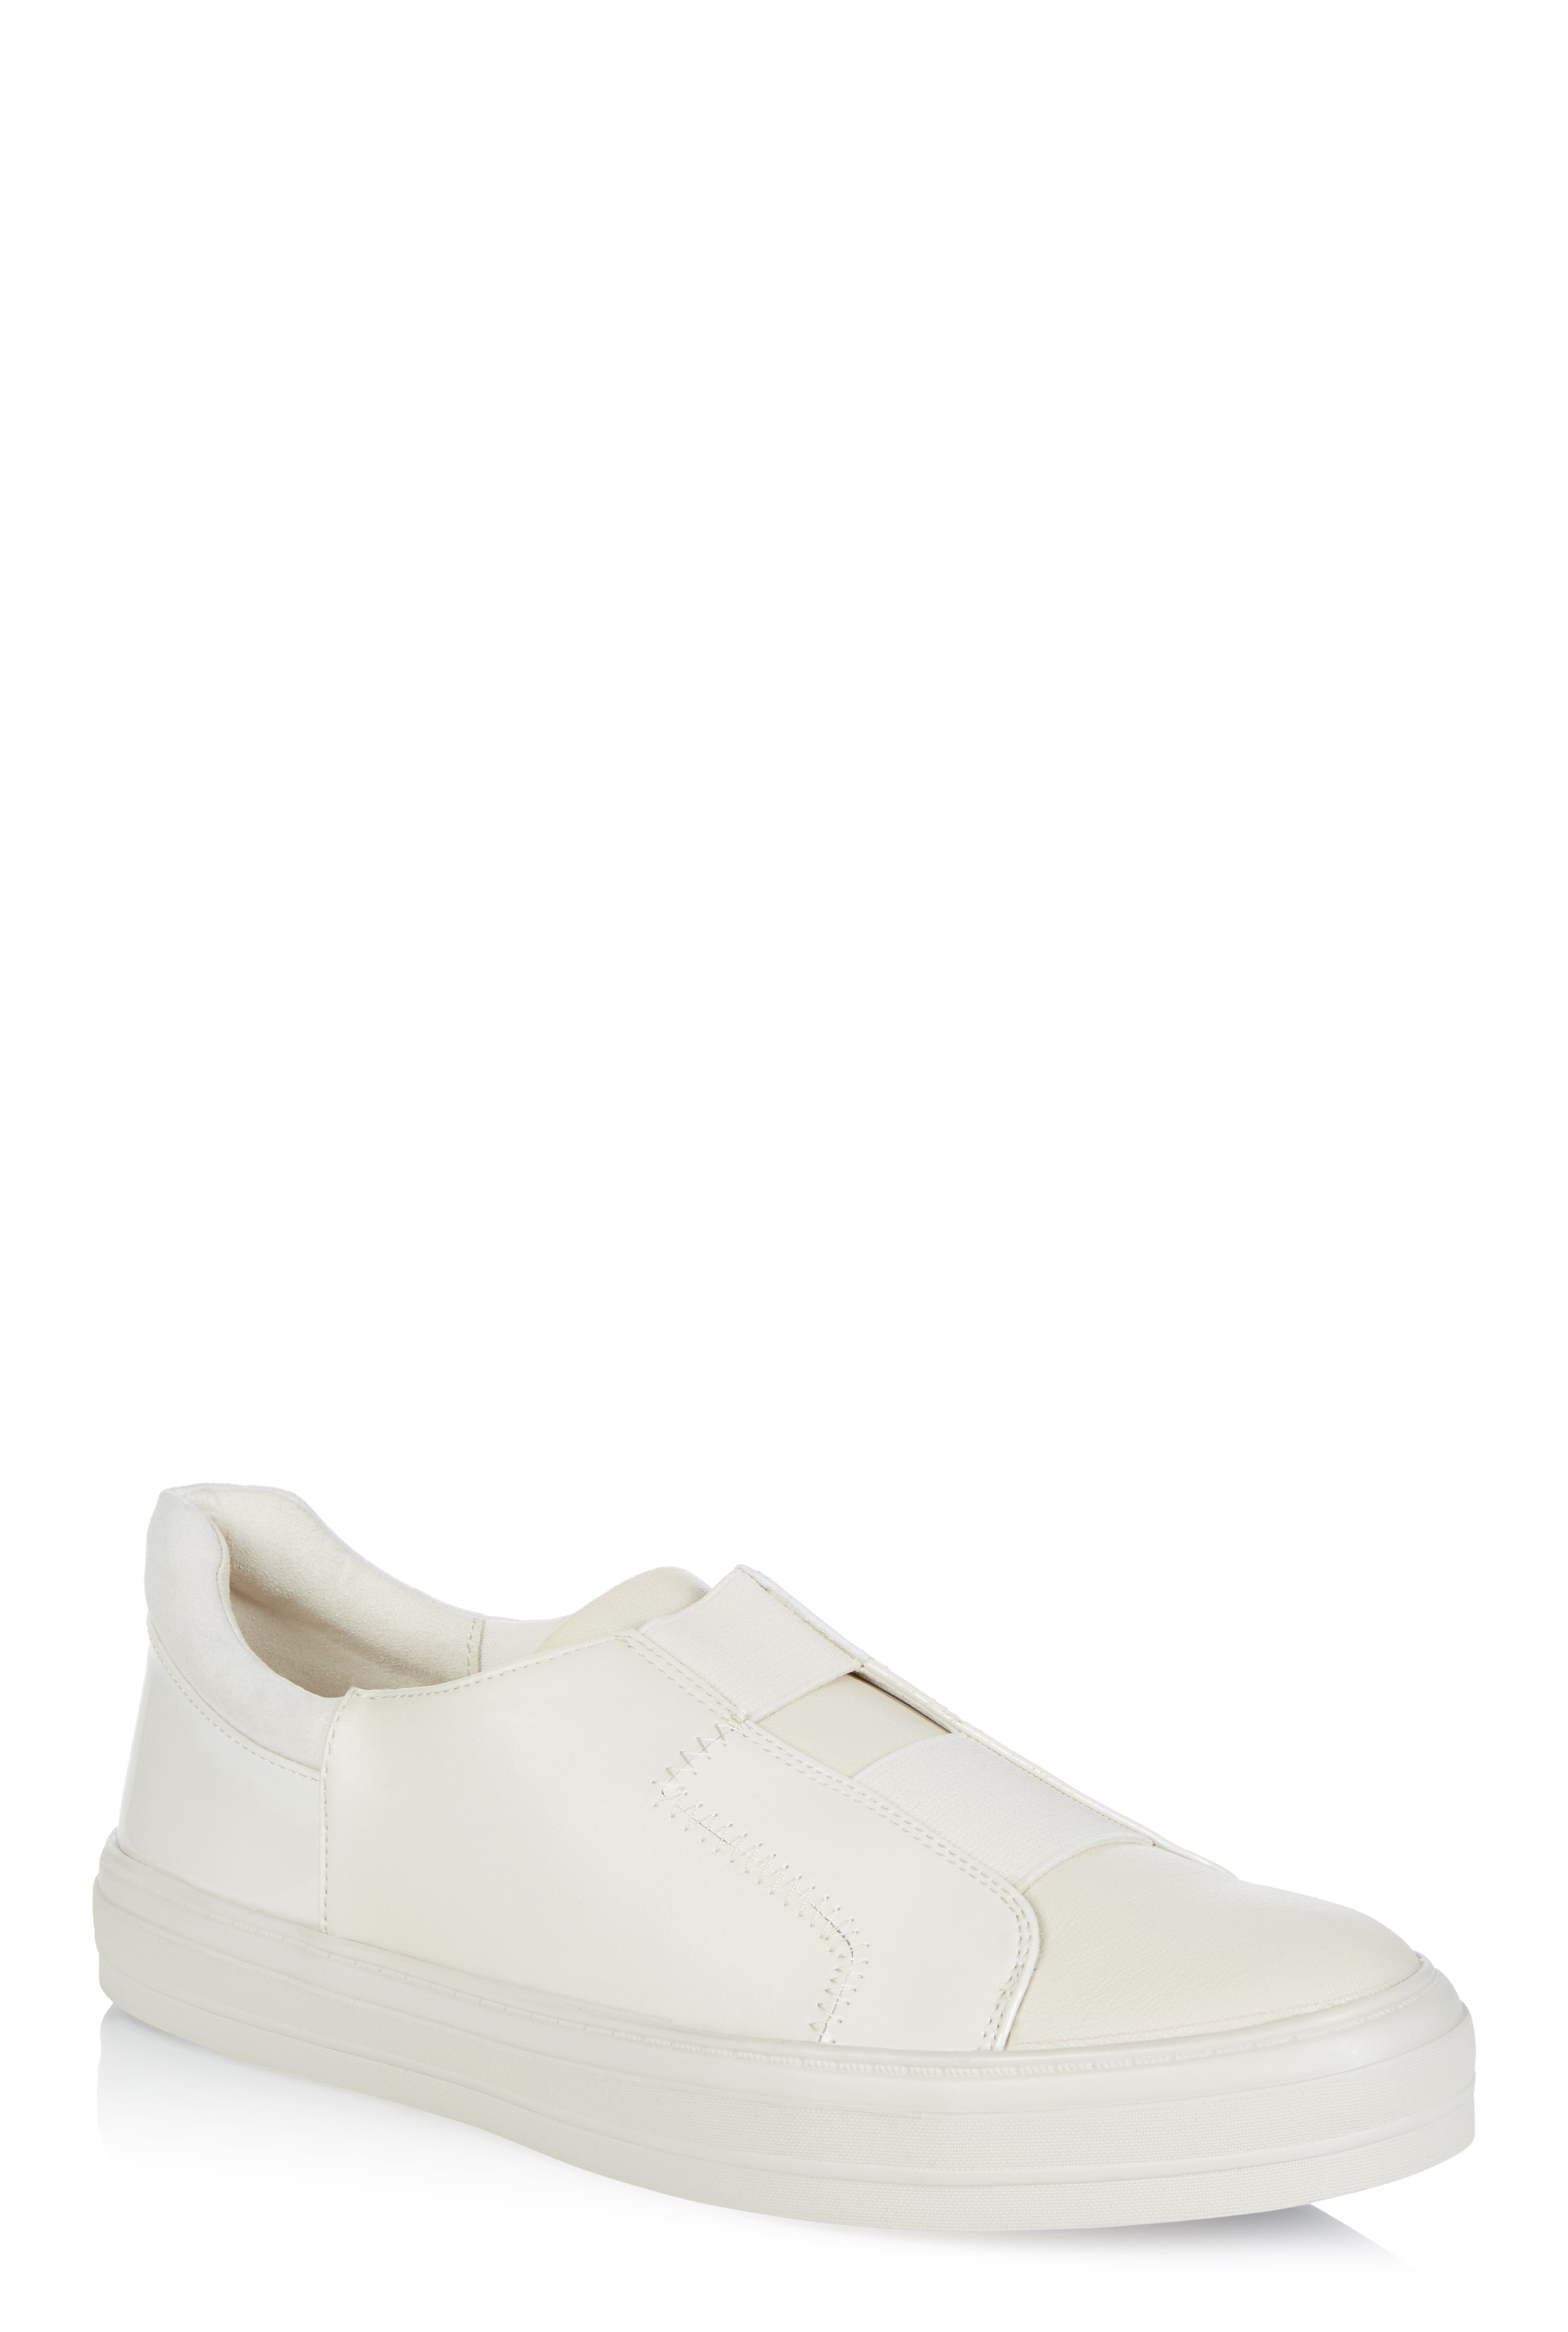 Nine West Obasi Sneaker | Long Tall Sally